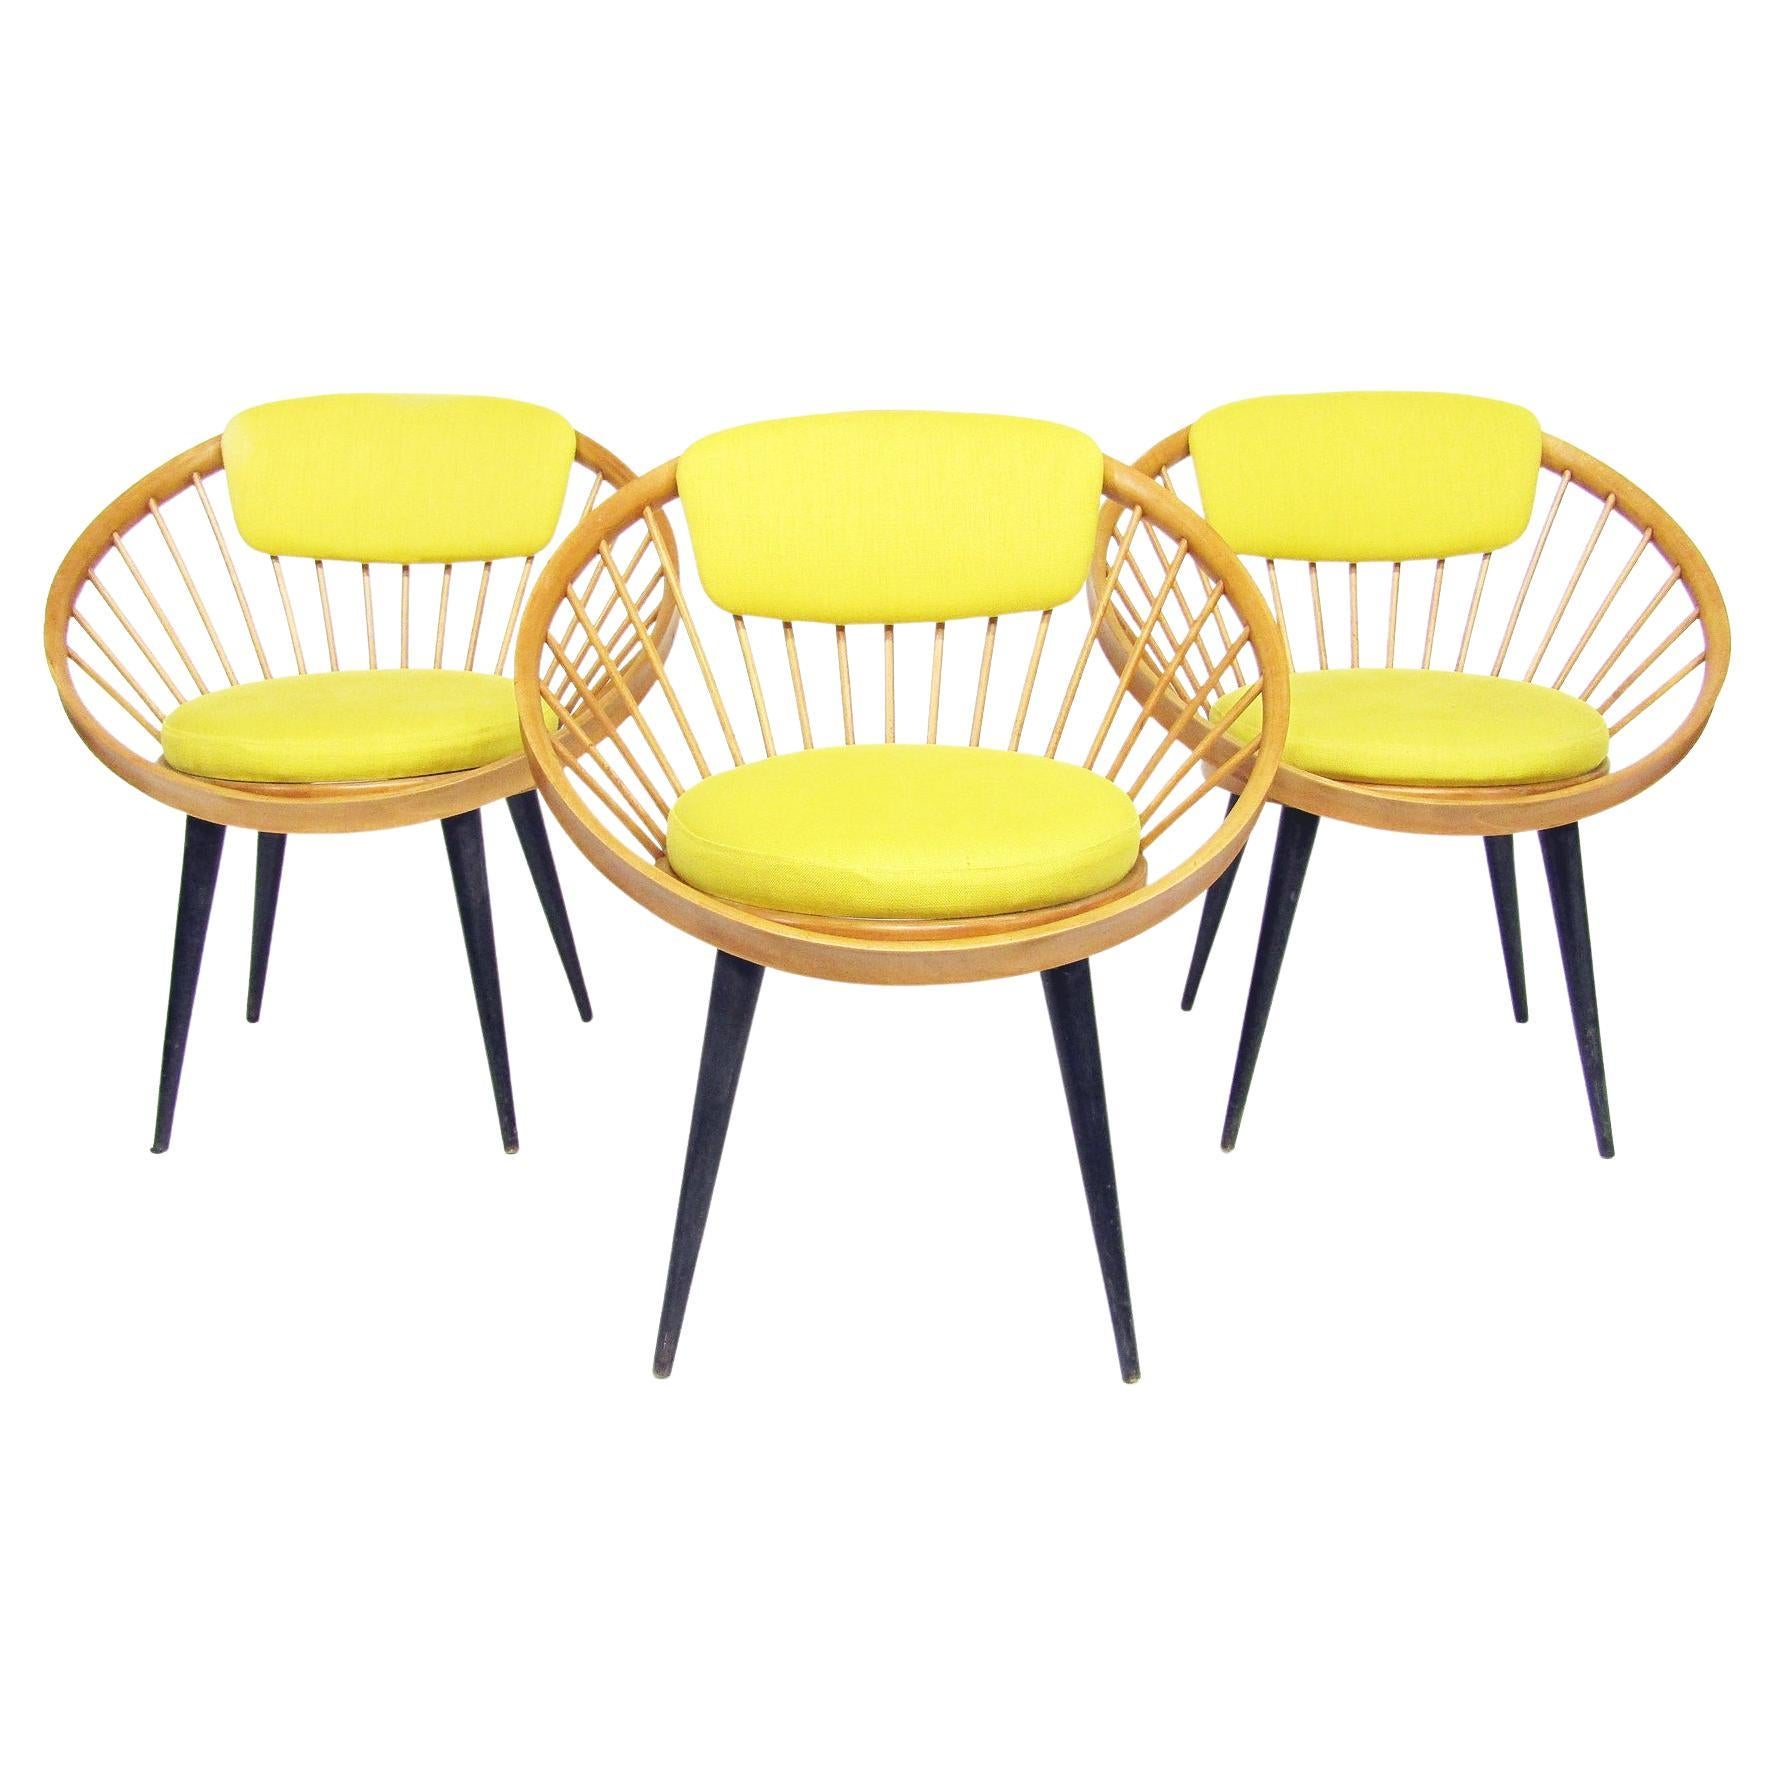 Three Swedish 1950s Cocktail "Circle" Chairs by Yngve Ekstrom for Swedese